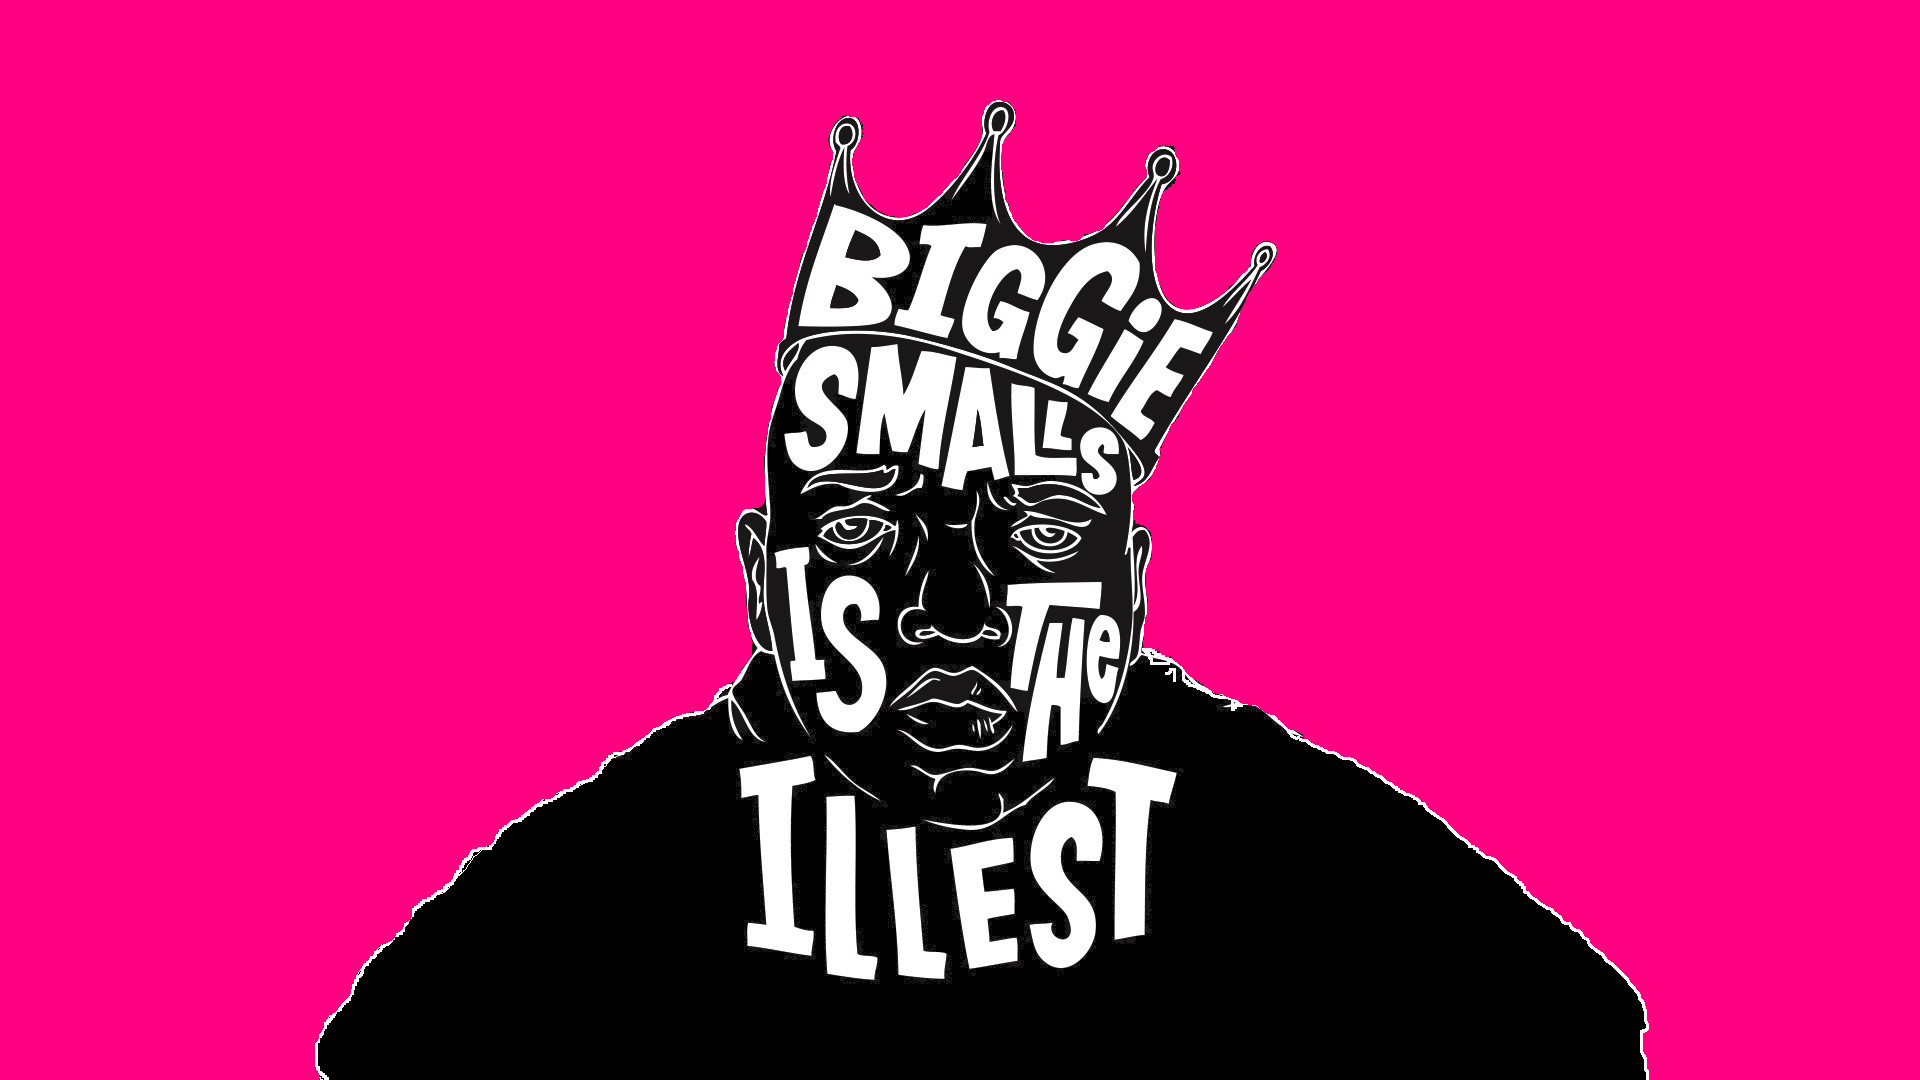 Biggie Smalls is the Illest Wallpaper for Phones and Tablets